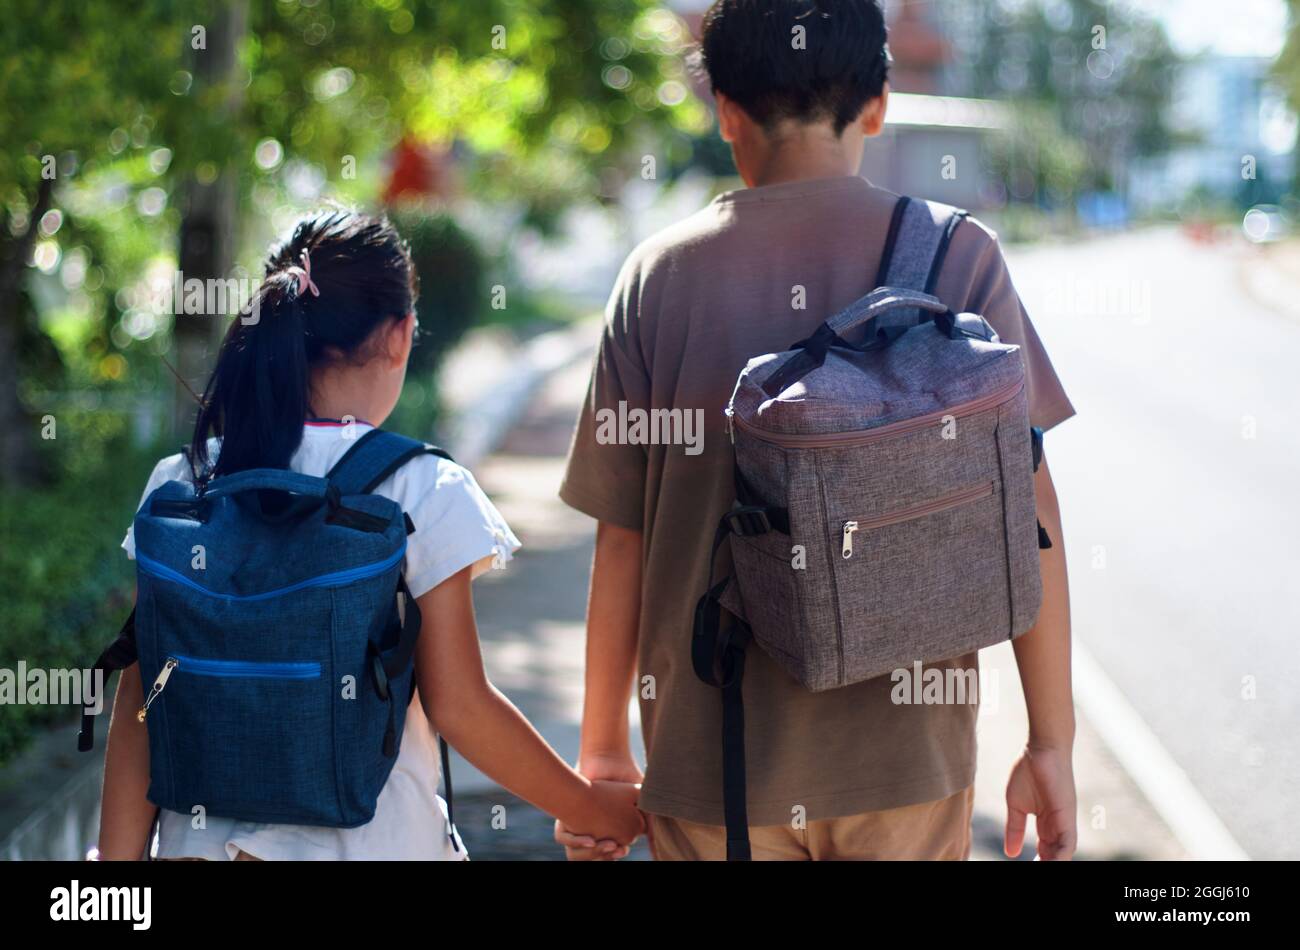 Brother and sister back to school COVID-19 pandemic Stock Photo